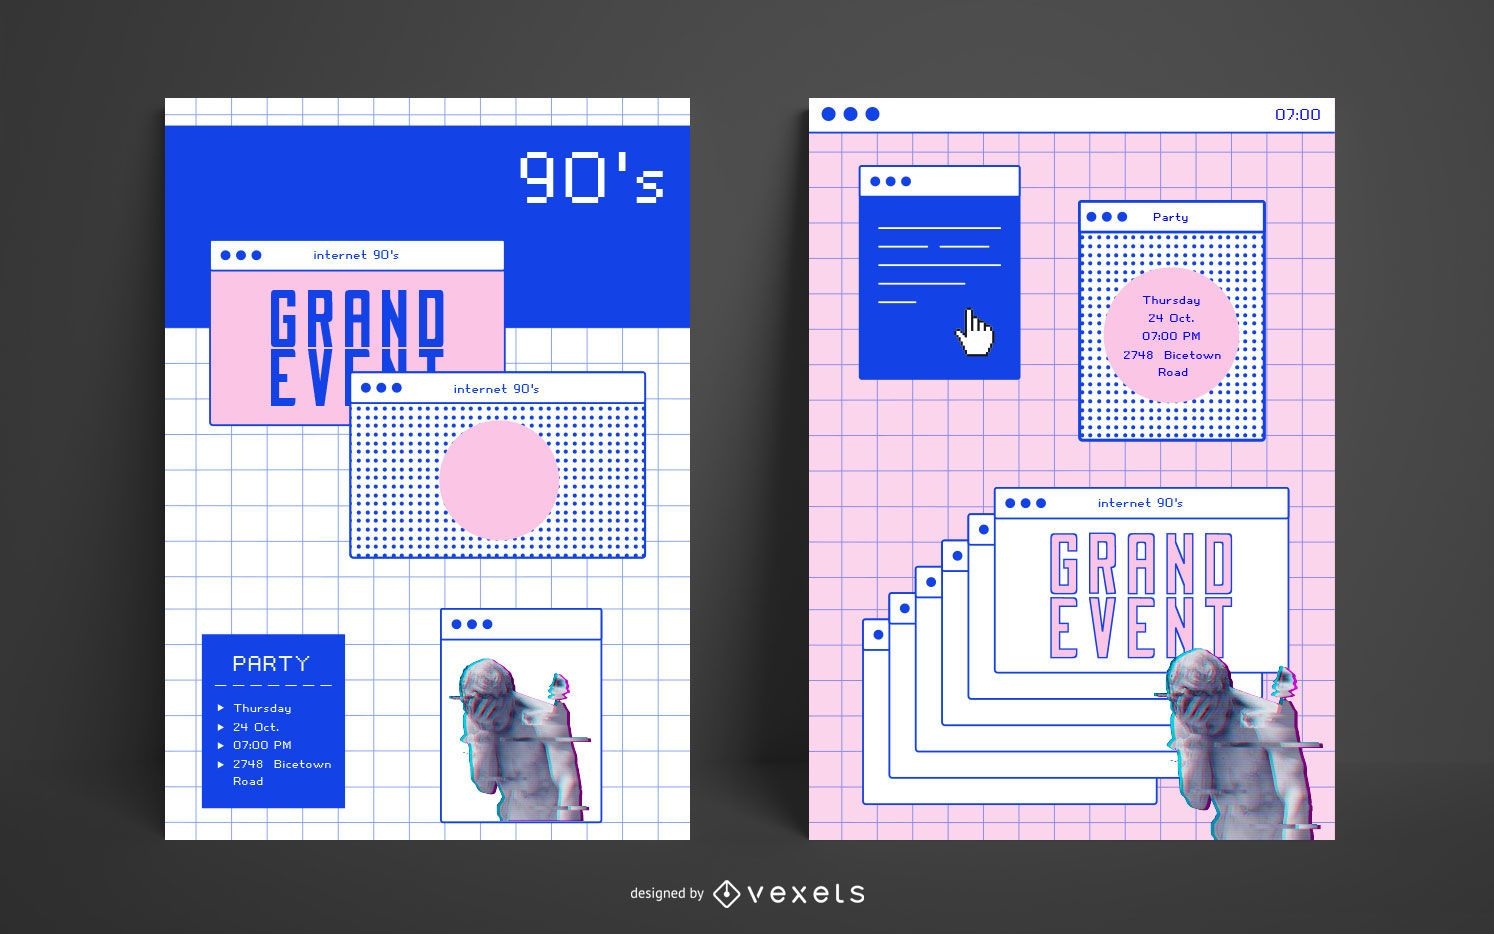 90s internet aesthetic poster template